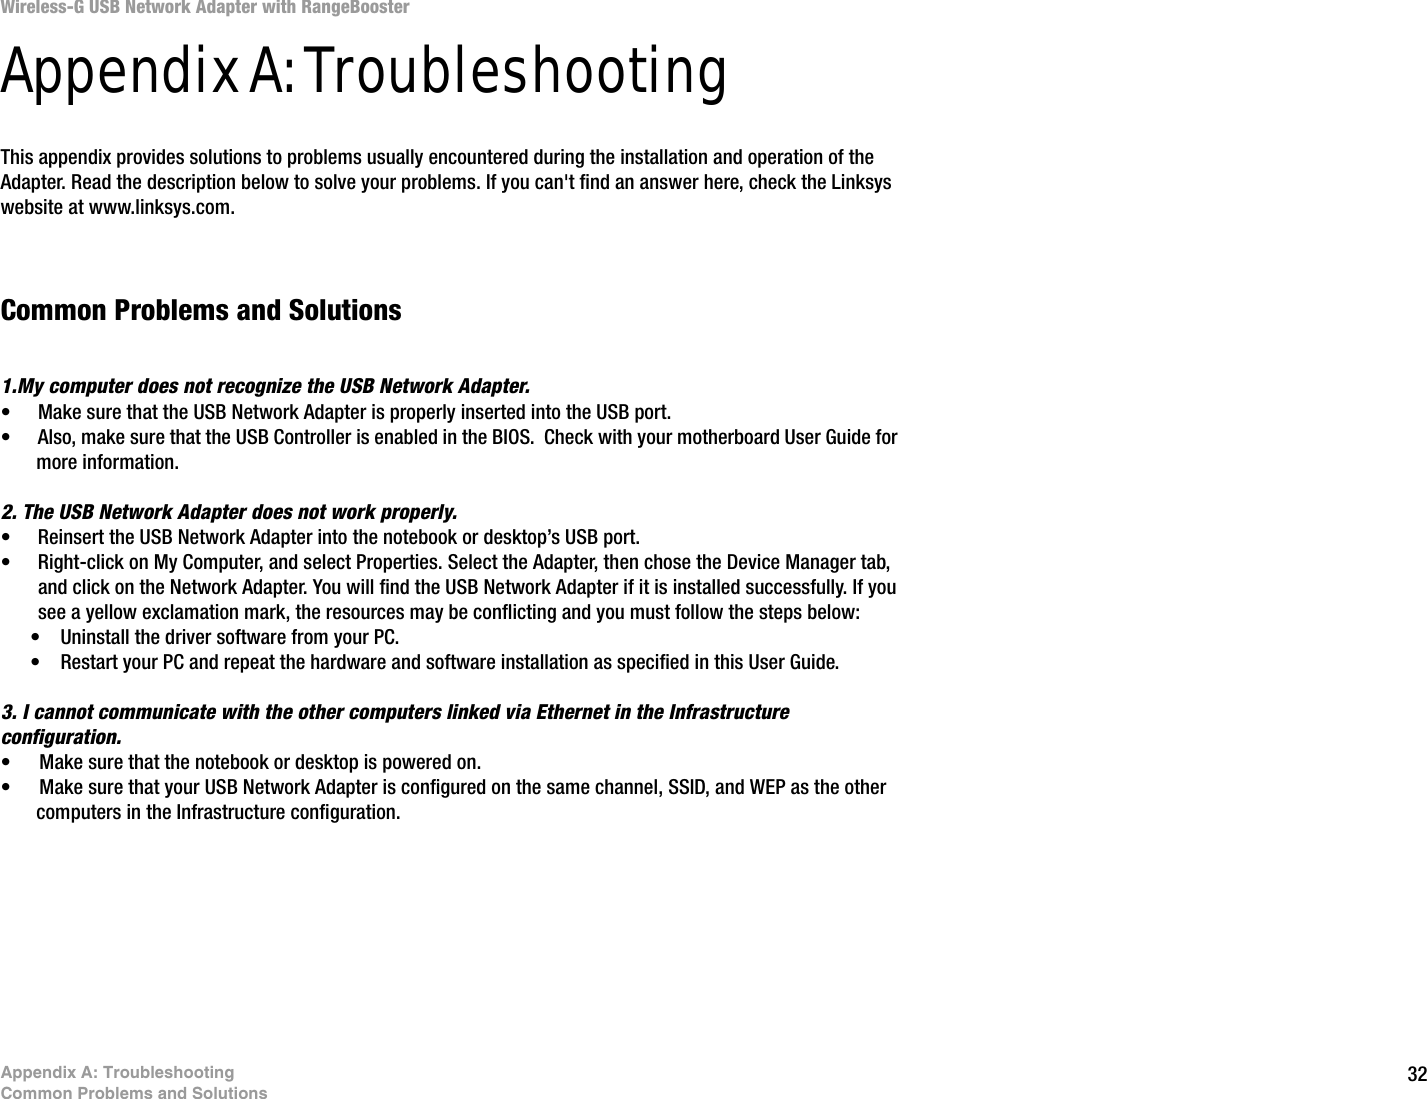 32Appendix A: TroubleshootingCommon Problems and SolutionsWireless-G USB Network Adapter with RangeBoosterAppendix A: TroubleshootingThis appendix provides solutions to problems usually encountered during the installation and operation of the Adapter. Read the description below to solve your problems. If you can&apos;t find an answer here, check the Linksys website at www.linksys.com.Common Problems and Solutions1.My computer does not recognize the USB Network Adapter.• Make sure that the USB Network Adapter is properly inserted into the USB port.• Also, make sure that the USB Controller is enabled in the BIOS.  Check with your motherboard User Guide for more information.2. The USB Network Adapter does not work properly.• Reinsert the USB Network Adapter into the notebook or desktop’s USB port. • Right-click on My Computer, and select Properties. Select the Adapter, then chose the Device Manager tab, and click on the Network Adapter. You will find the USB Network Adapter if it is installed successfully. If you see a yellow exclamation mark, the resources may be conflicting and you must follow the steps below:• Uninstall the driver software from your PC.• Restart your PC and repeat the hardware and software installation as specified in this User Guide.3. I cannot communicate with the other computers linked via Ethernet in the Infrastructure configuration.• Make sure that the notebook or desktop is powered on.• Make sure that your USB Network Adapter is configured on the same channel, SSID, and WEP as the other computers in the Infrastructure configuration. 